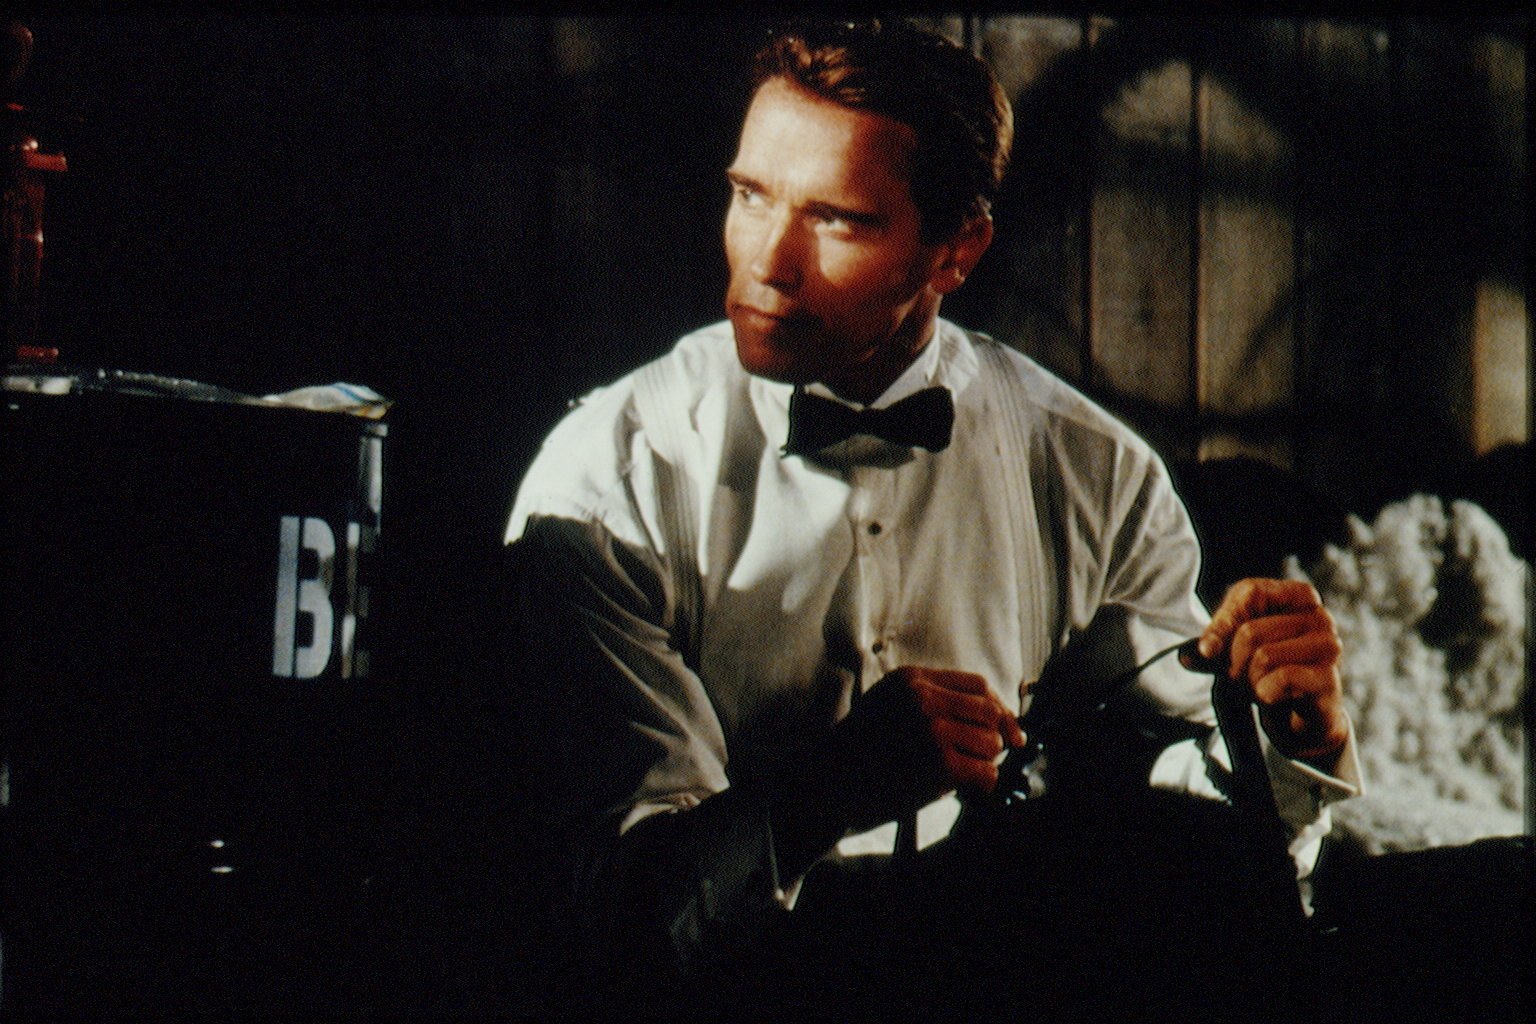 CBS is turning the Arnold Schwarzenegger hit True Lies into a TV show